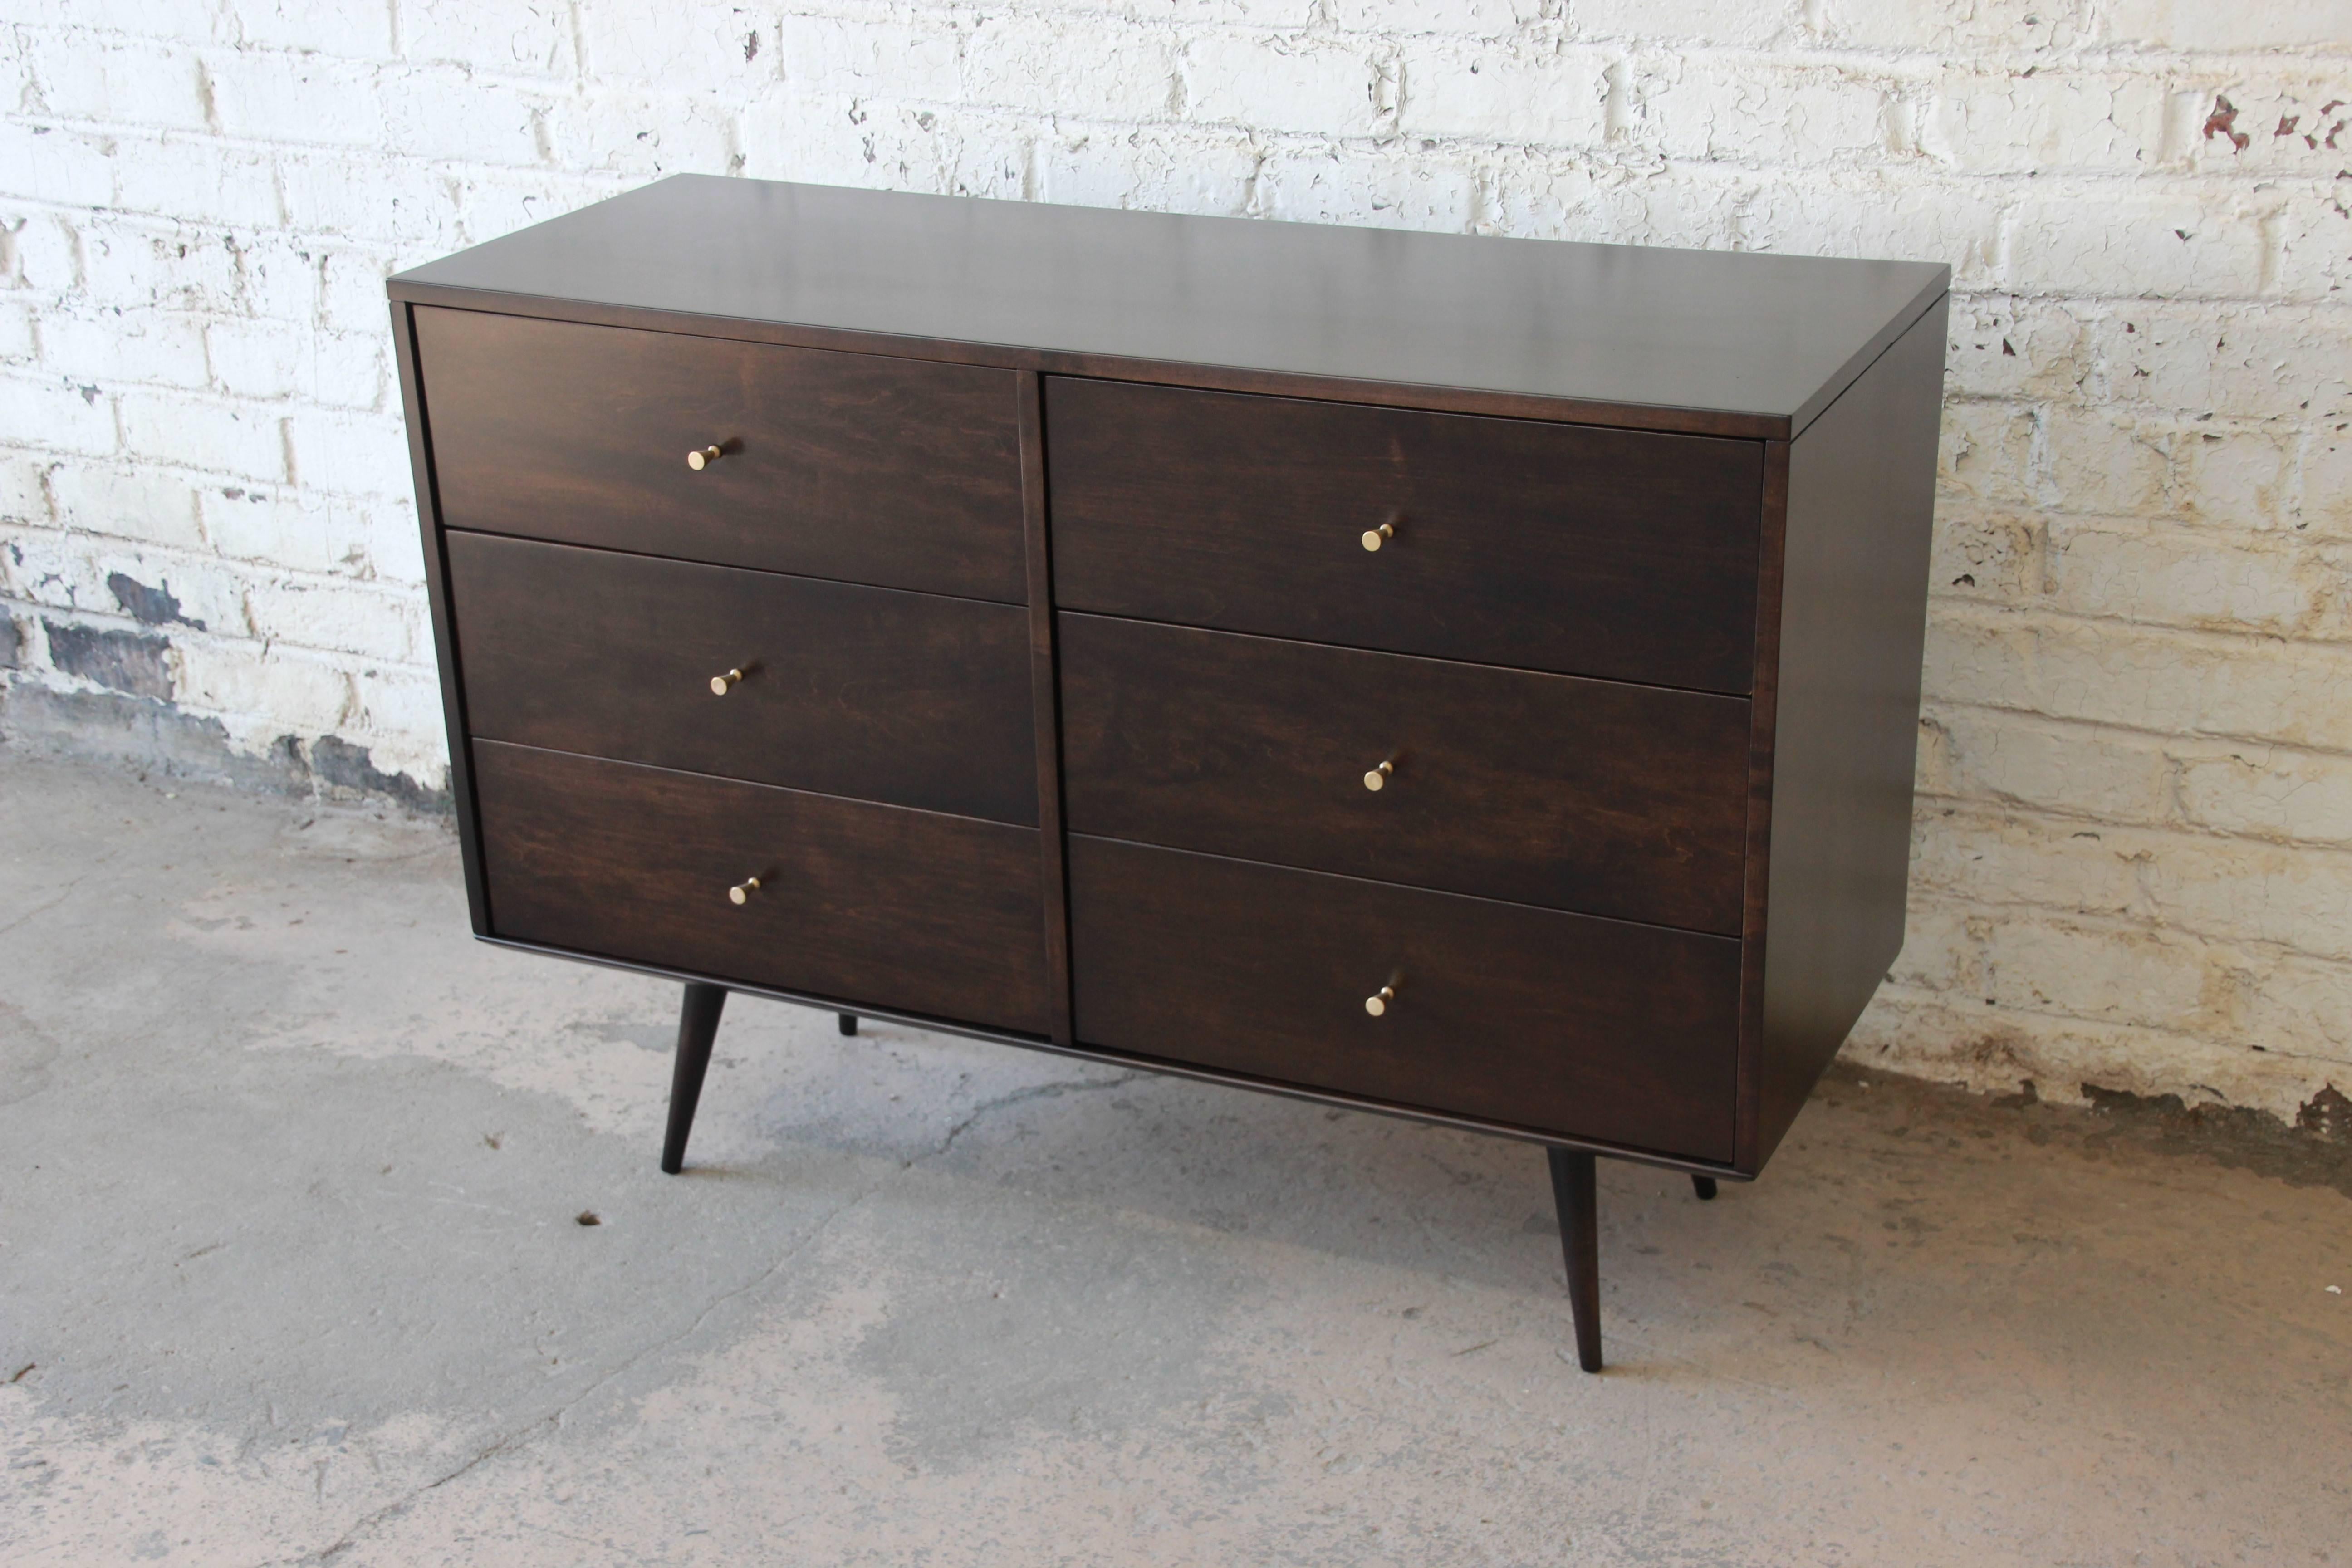 An exceptional Mid-Century Modern six-drawer dresser designed by Paul McCobb for the Planner Group line by Winchendon Furniture. The dresser features solid birch construction and sleek and stylish midcentury lines, the case resting on tall tapered